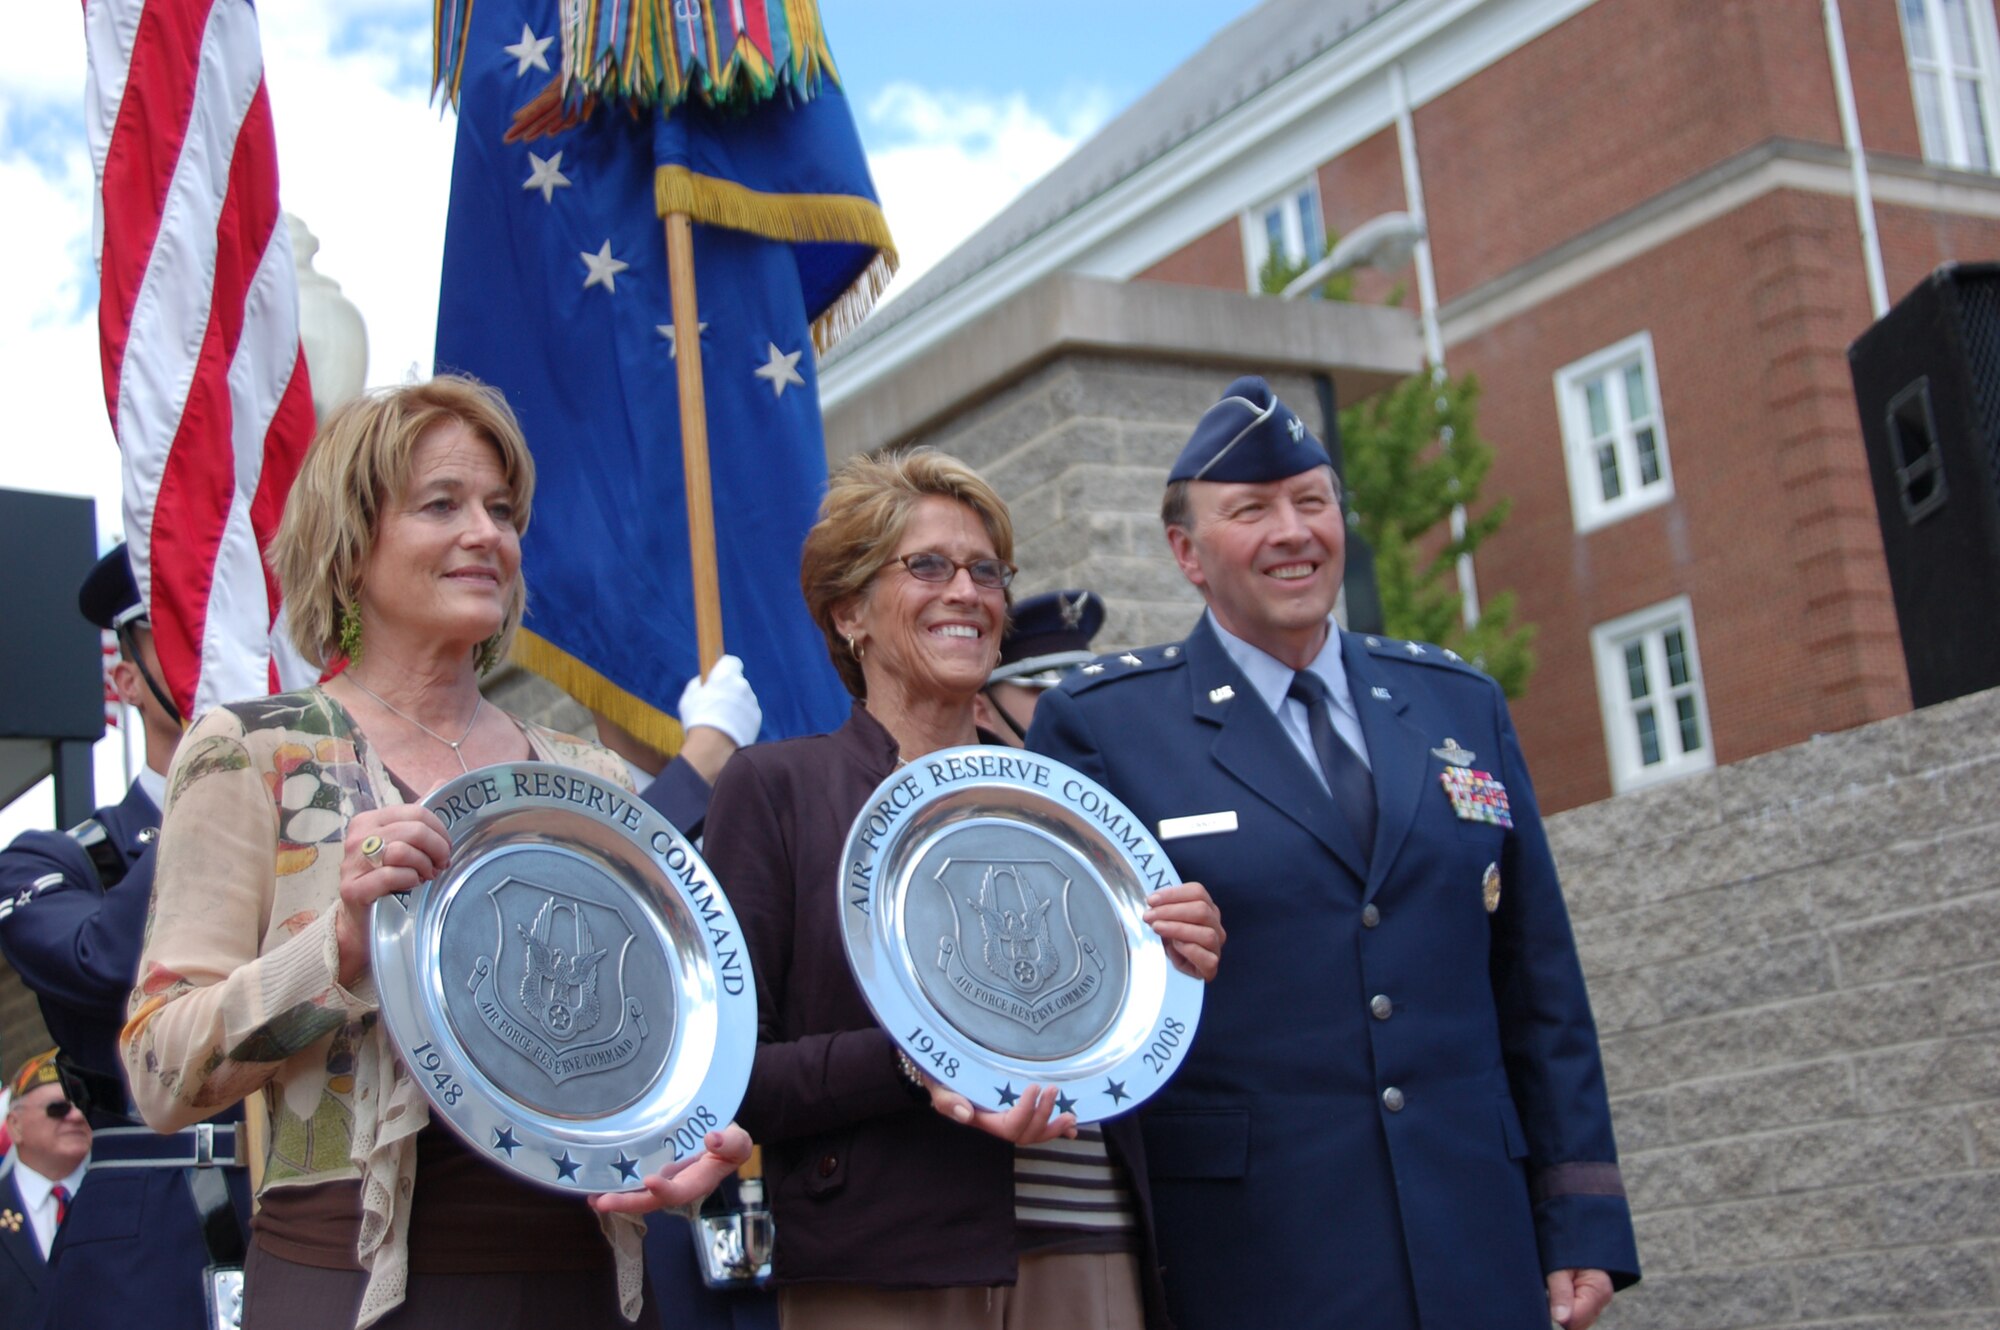 Maj. Gen. Charles E. Stenner Jr., assistant deputy chief of staff for Strategic Plans and Programs, Headquarters U.S. Air Force, represented the Air Force Reserve Command during a ceremony in Indiana, Pa., honoring former reservist and Hollywood actor James Stewart. He presented Kelly Stewart Harcourt and Judy Stewart, the actor’s daughters , with two pewter plaques commemorating the Air Force Reserve’s 60th anniversary.  He also gave them a photograph of their father sitting at his desk when he served as deputy director of the Office of Information Services, the predecessor to Secretary of the Air Force Public Affairs. (U.S. Air Force photo/Lt Col Lori Largen) 